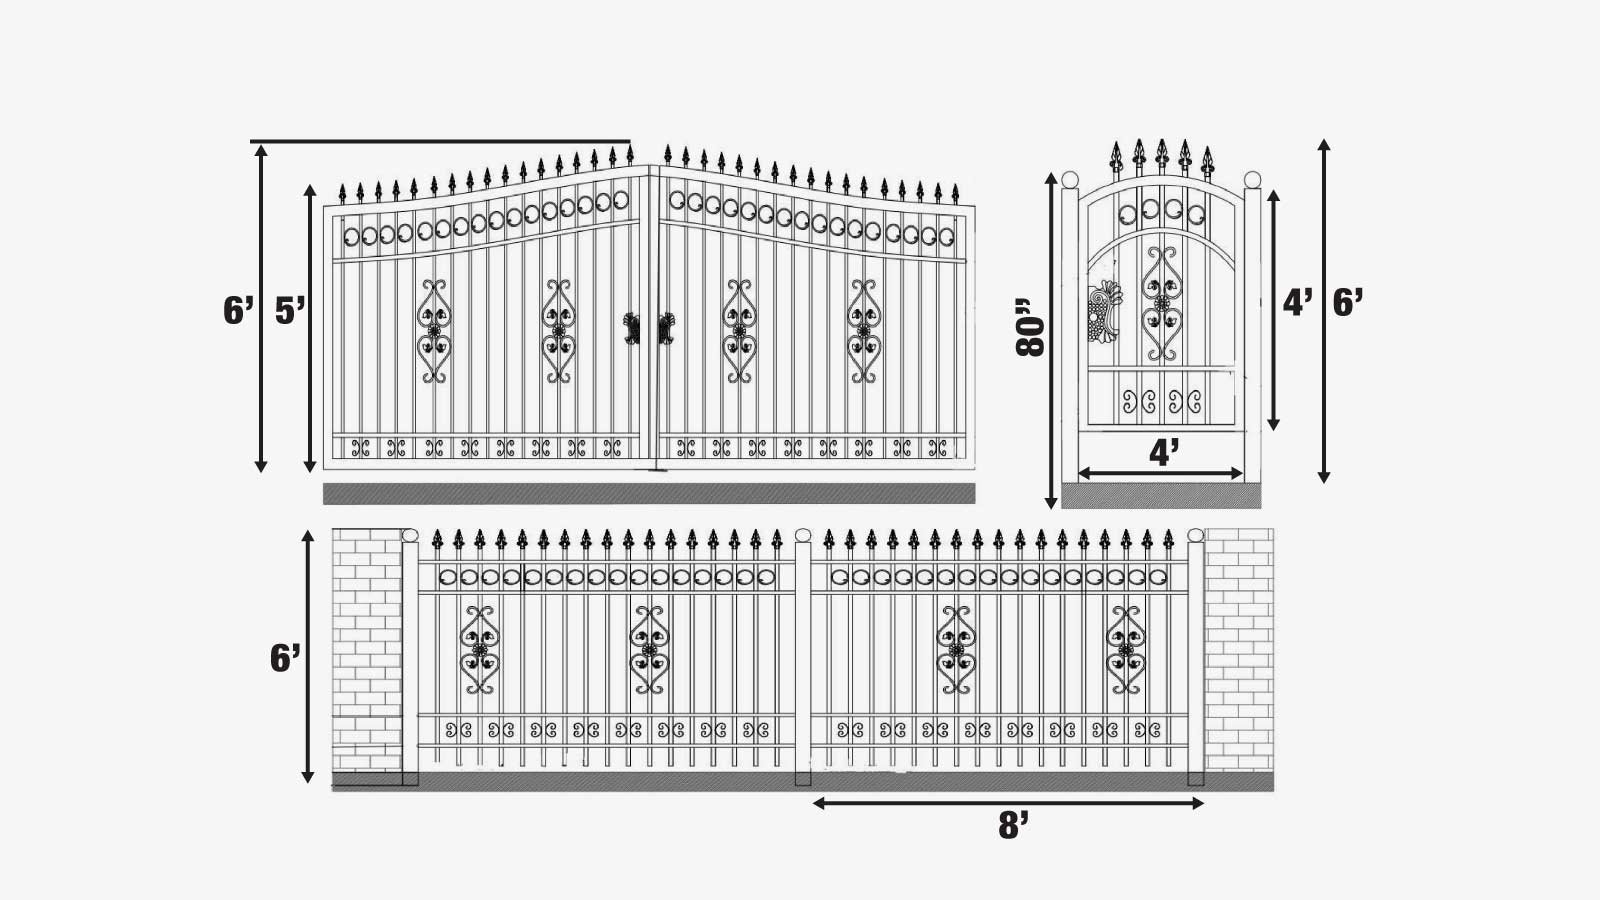 TMG Industrial 88-ft Bi-Parting Ornamental Wrought Iron Gate & Fence Panels Combo Pack, All Steel, Powder Coated, TMG-MG88P-specifications-image